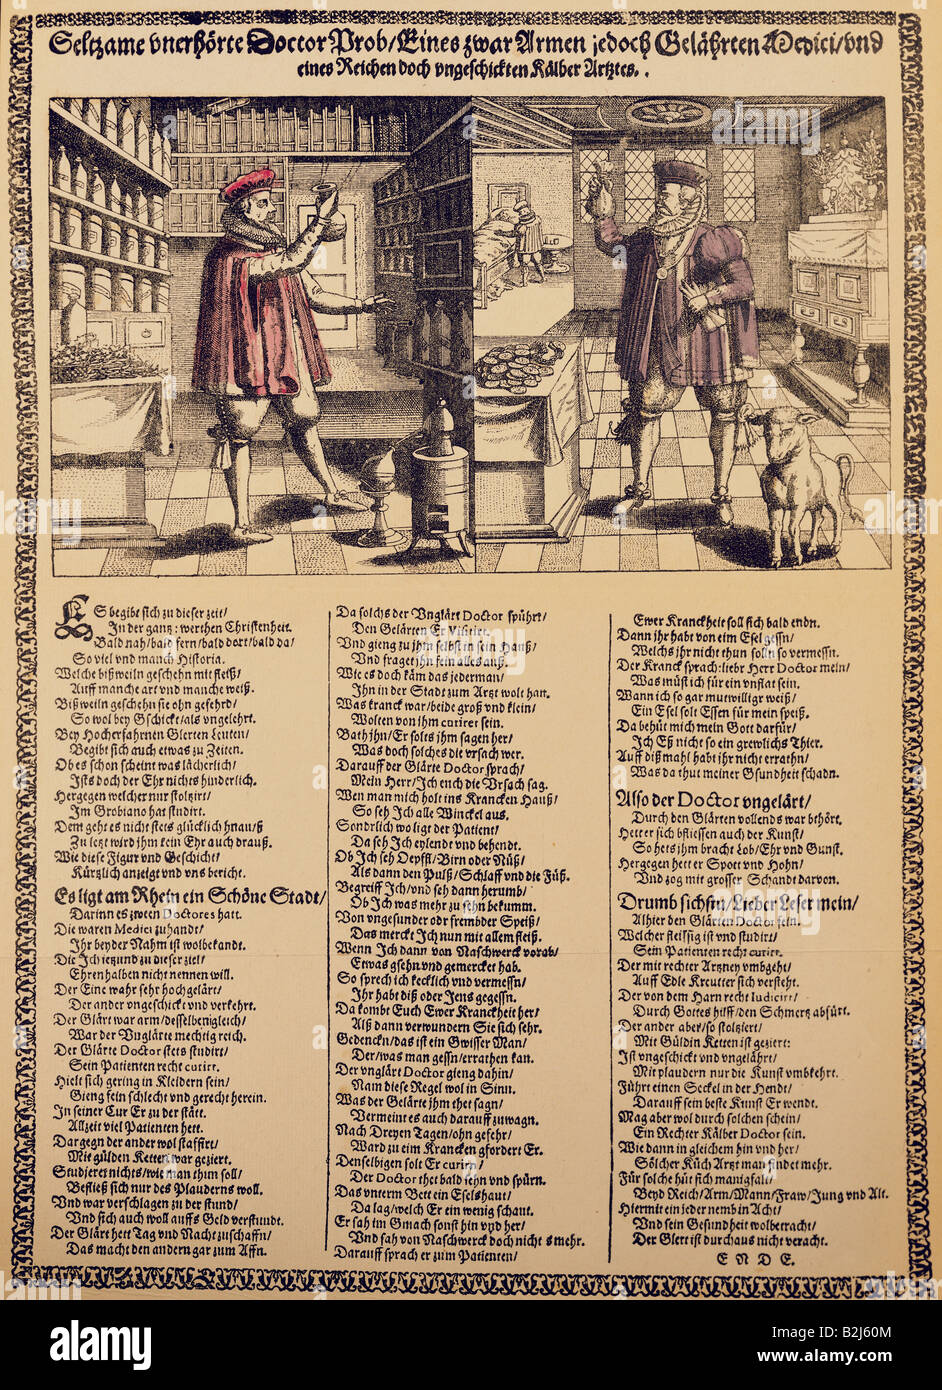 medicine, physicians, 'Strange outrageous test of a poor but scholary medic and a rich but awkward physician', satirical leaflet, South Germany, 2nd half 16th century, private collection, , Stock Photo